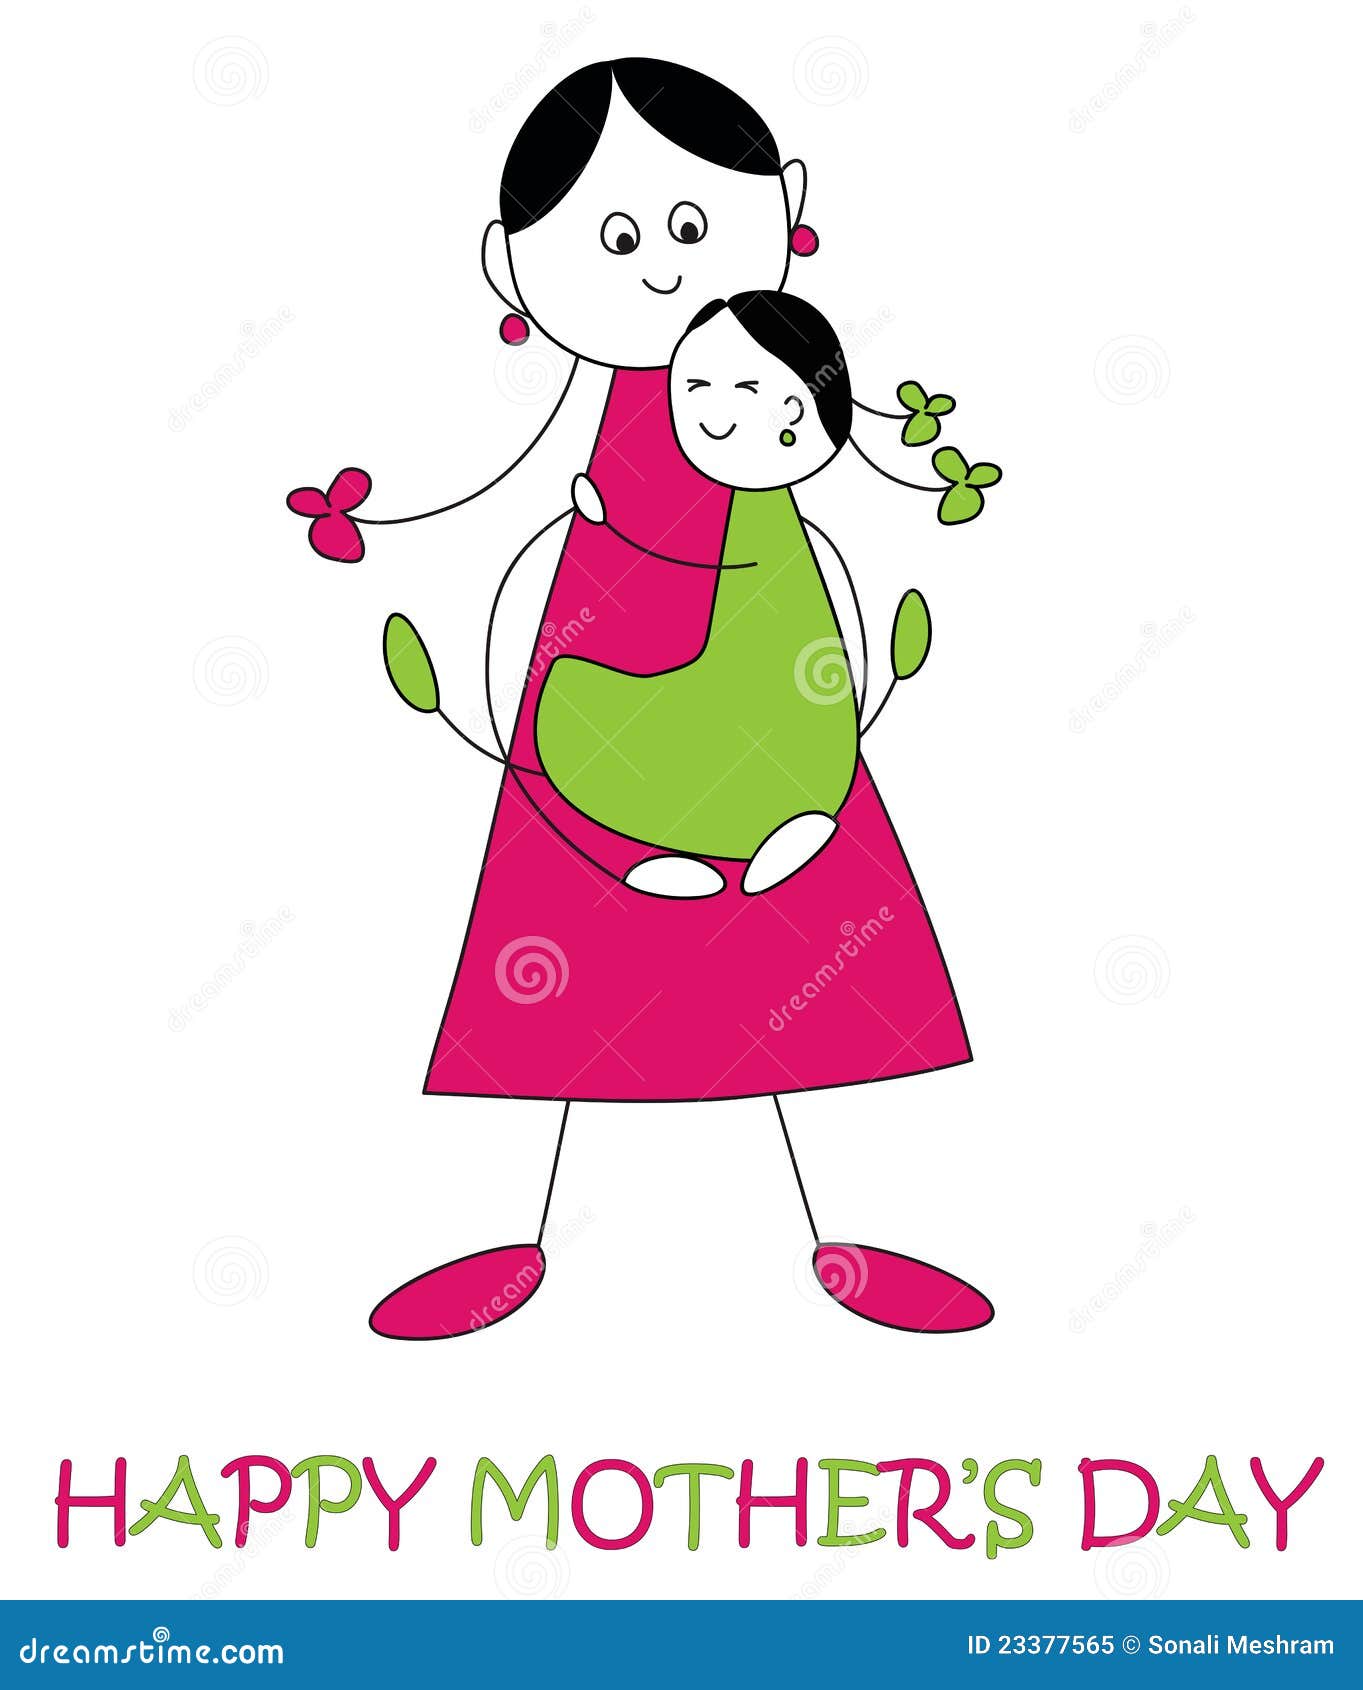 free animated clip art mother's day - photo #25